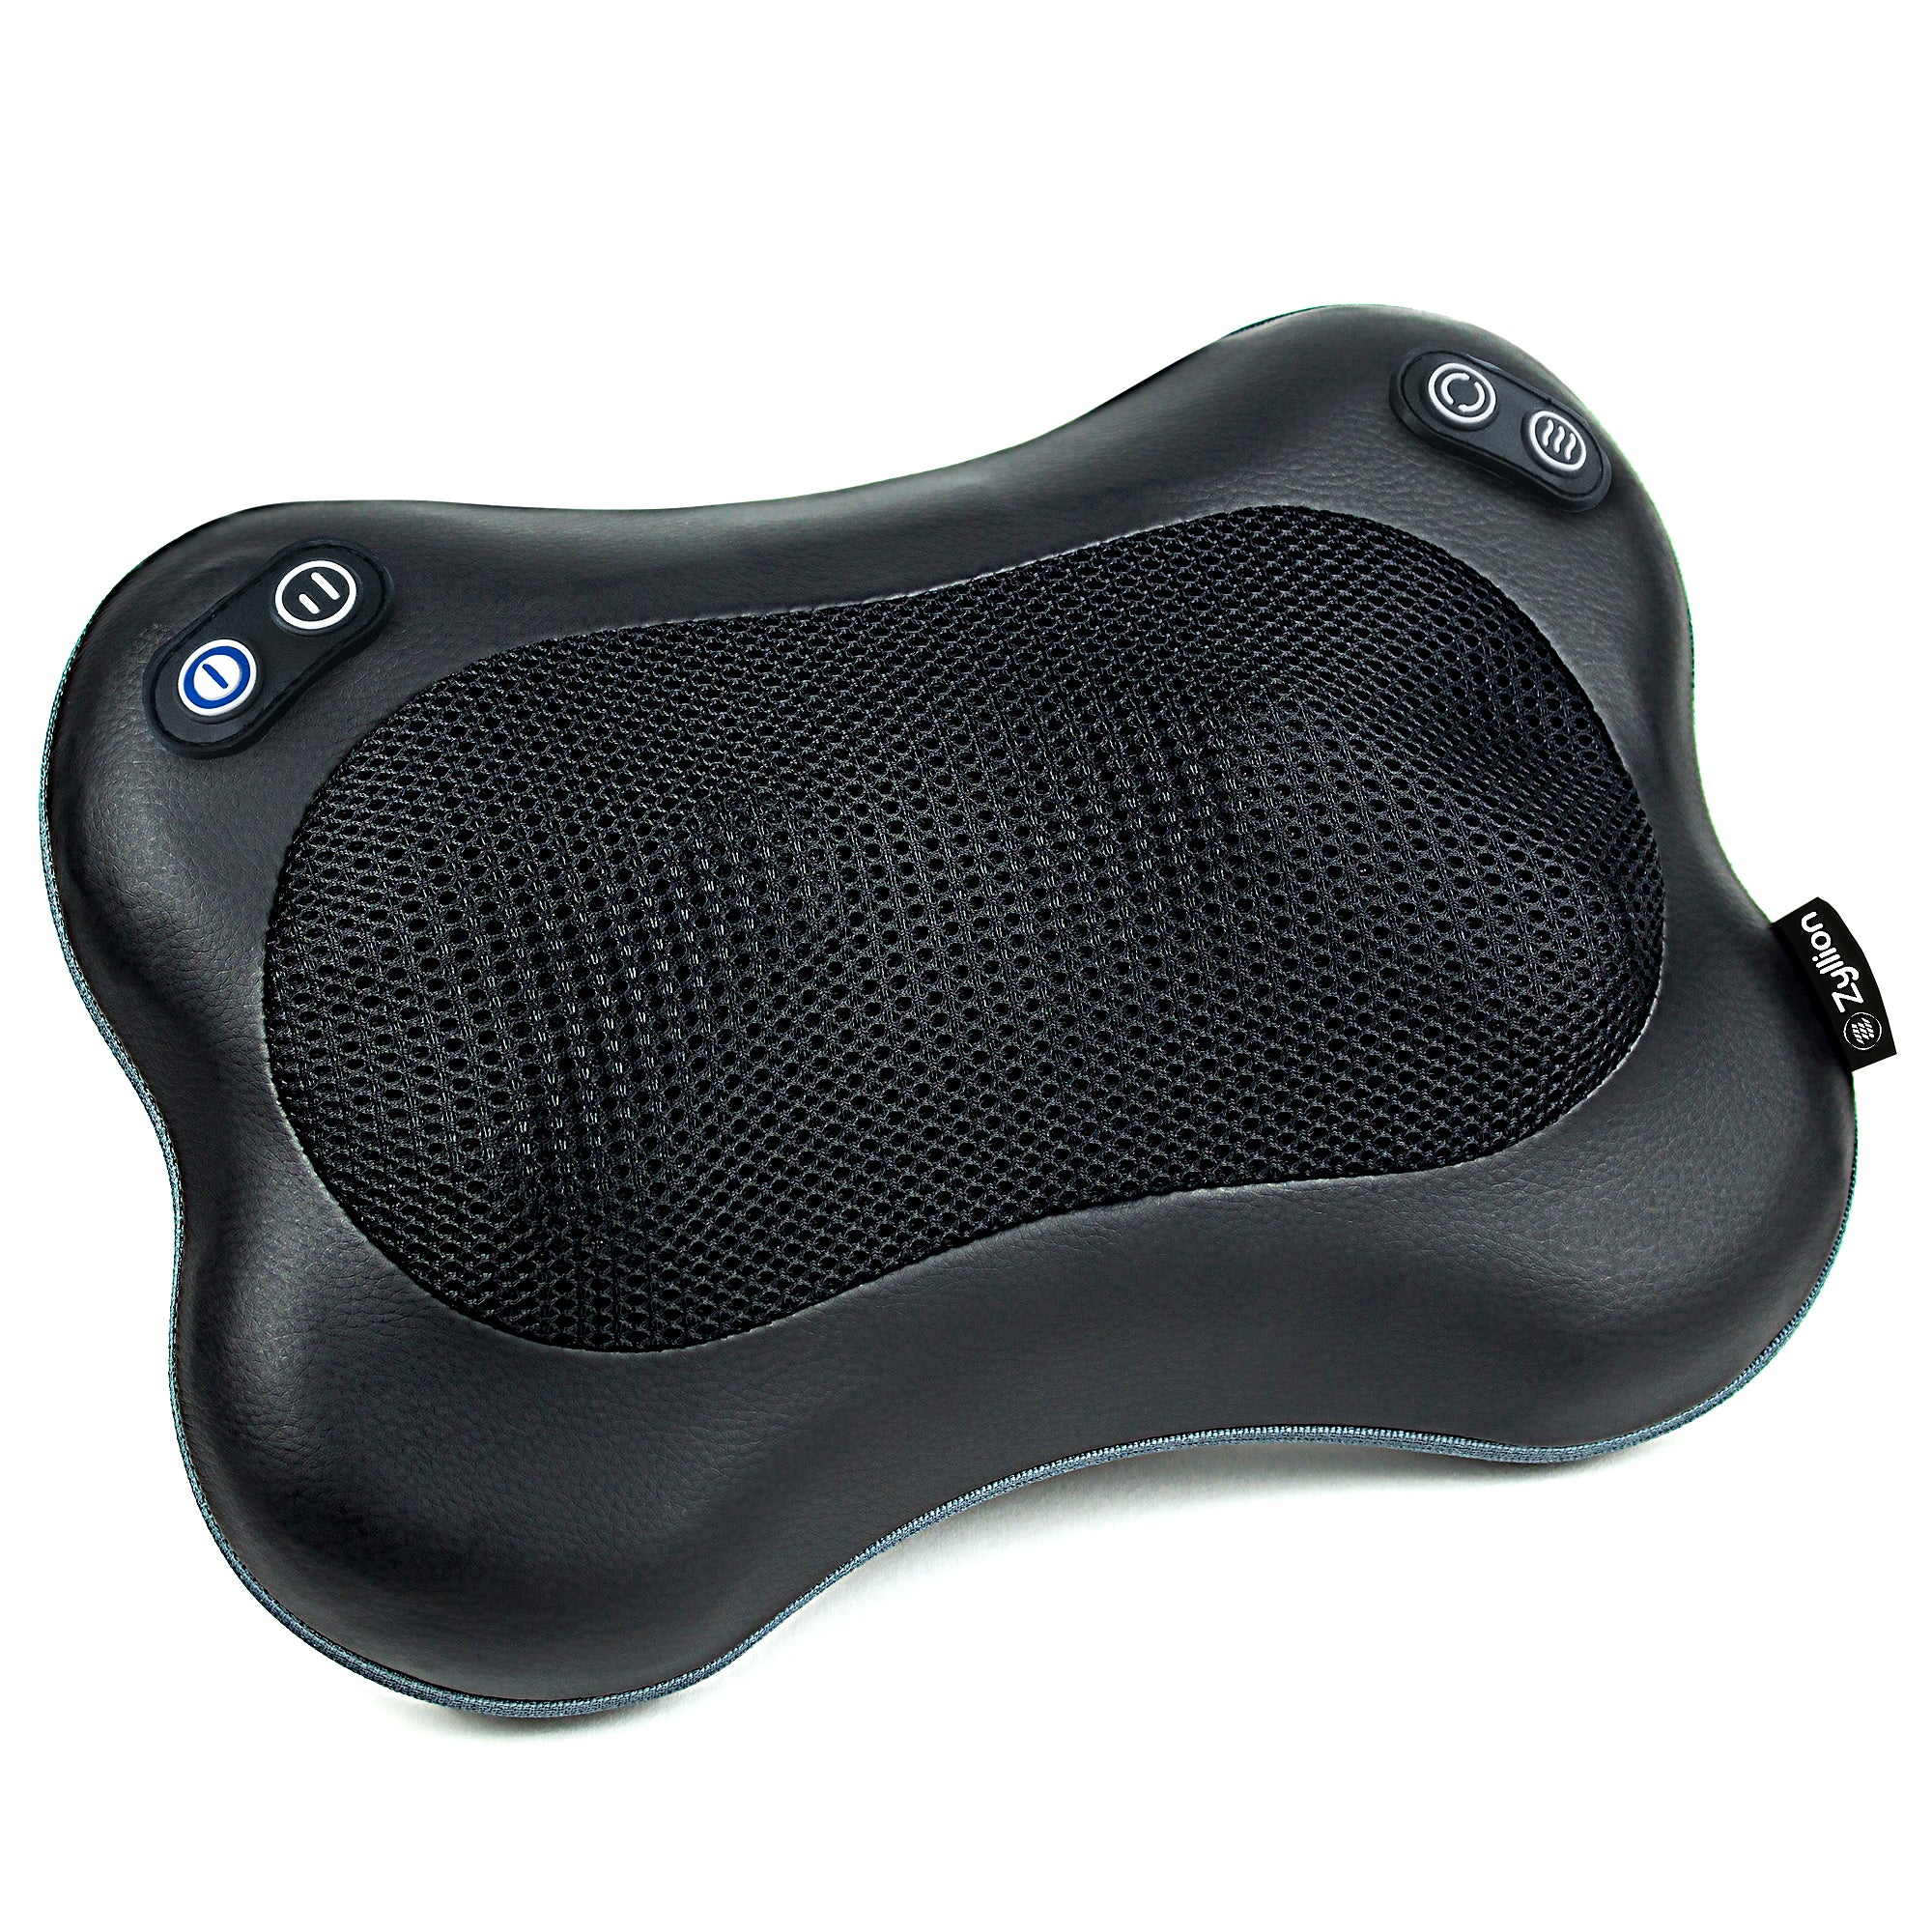 YONGSTYLE Rechargeable Back and Neck Massager with Heat - Cordless Shiatsu  3D Deep Tissue Massage Pillow, 2 Speeds and Bi-Directional Control for  Muscle Pain Relief - Black ZMA-34RB-BK